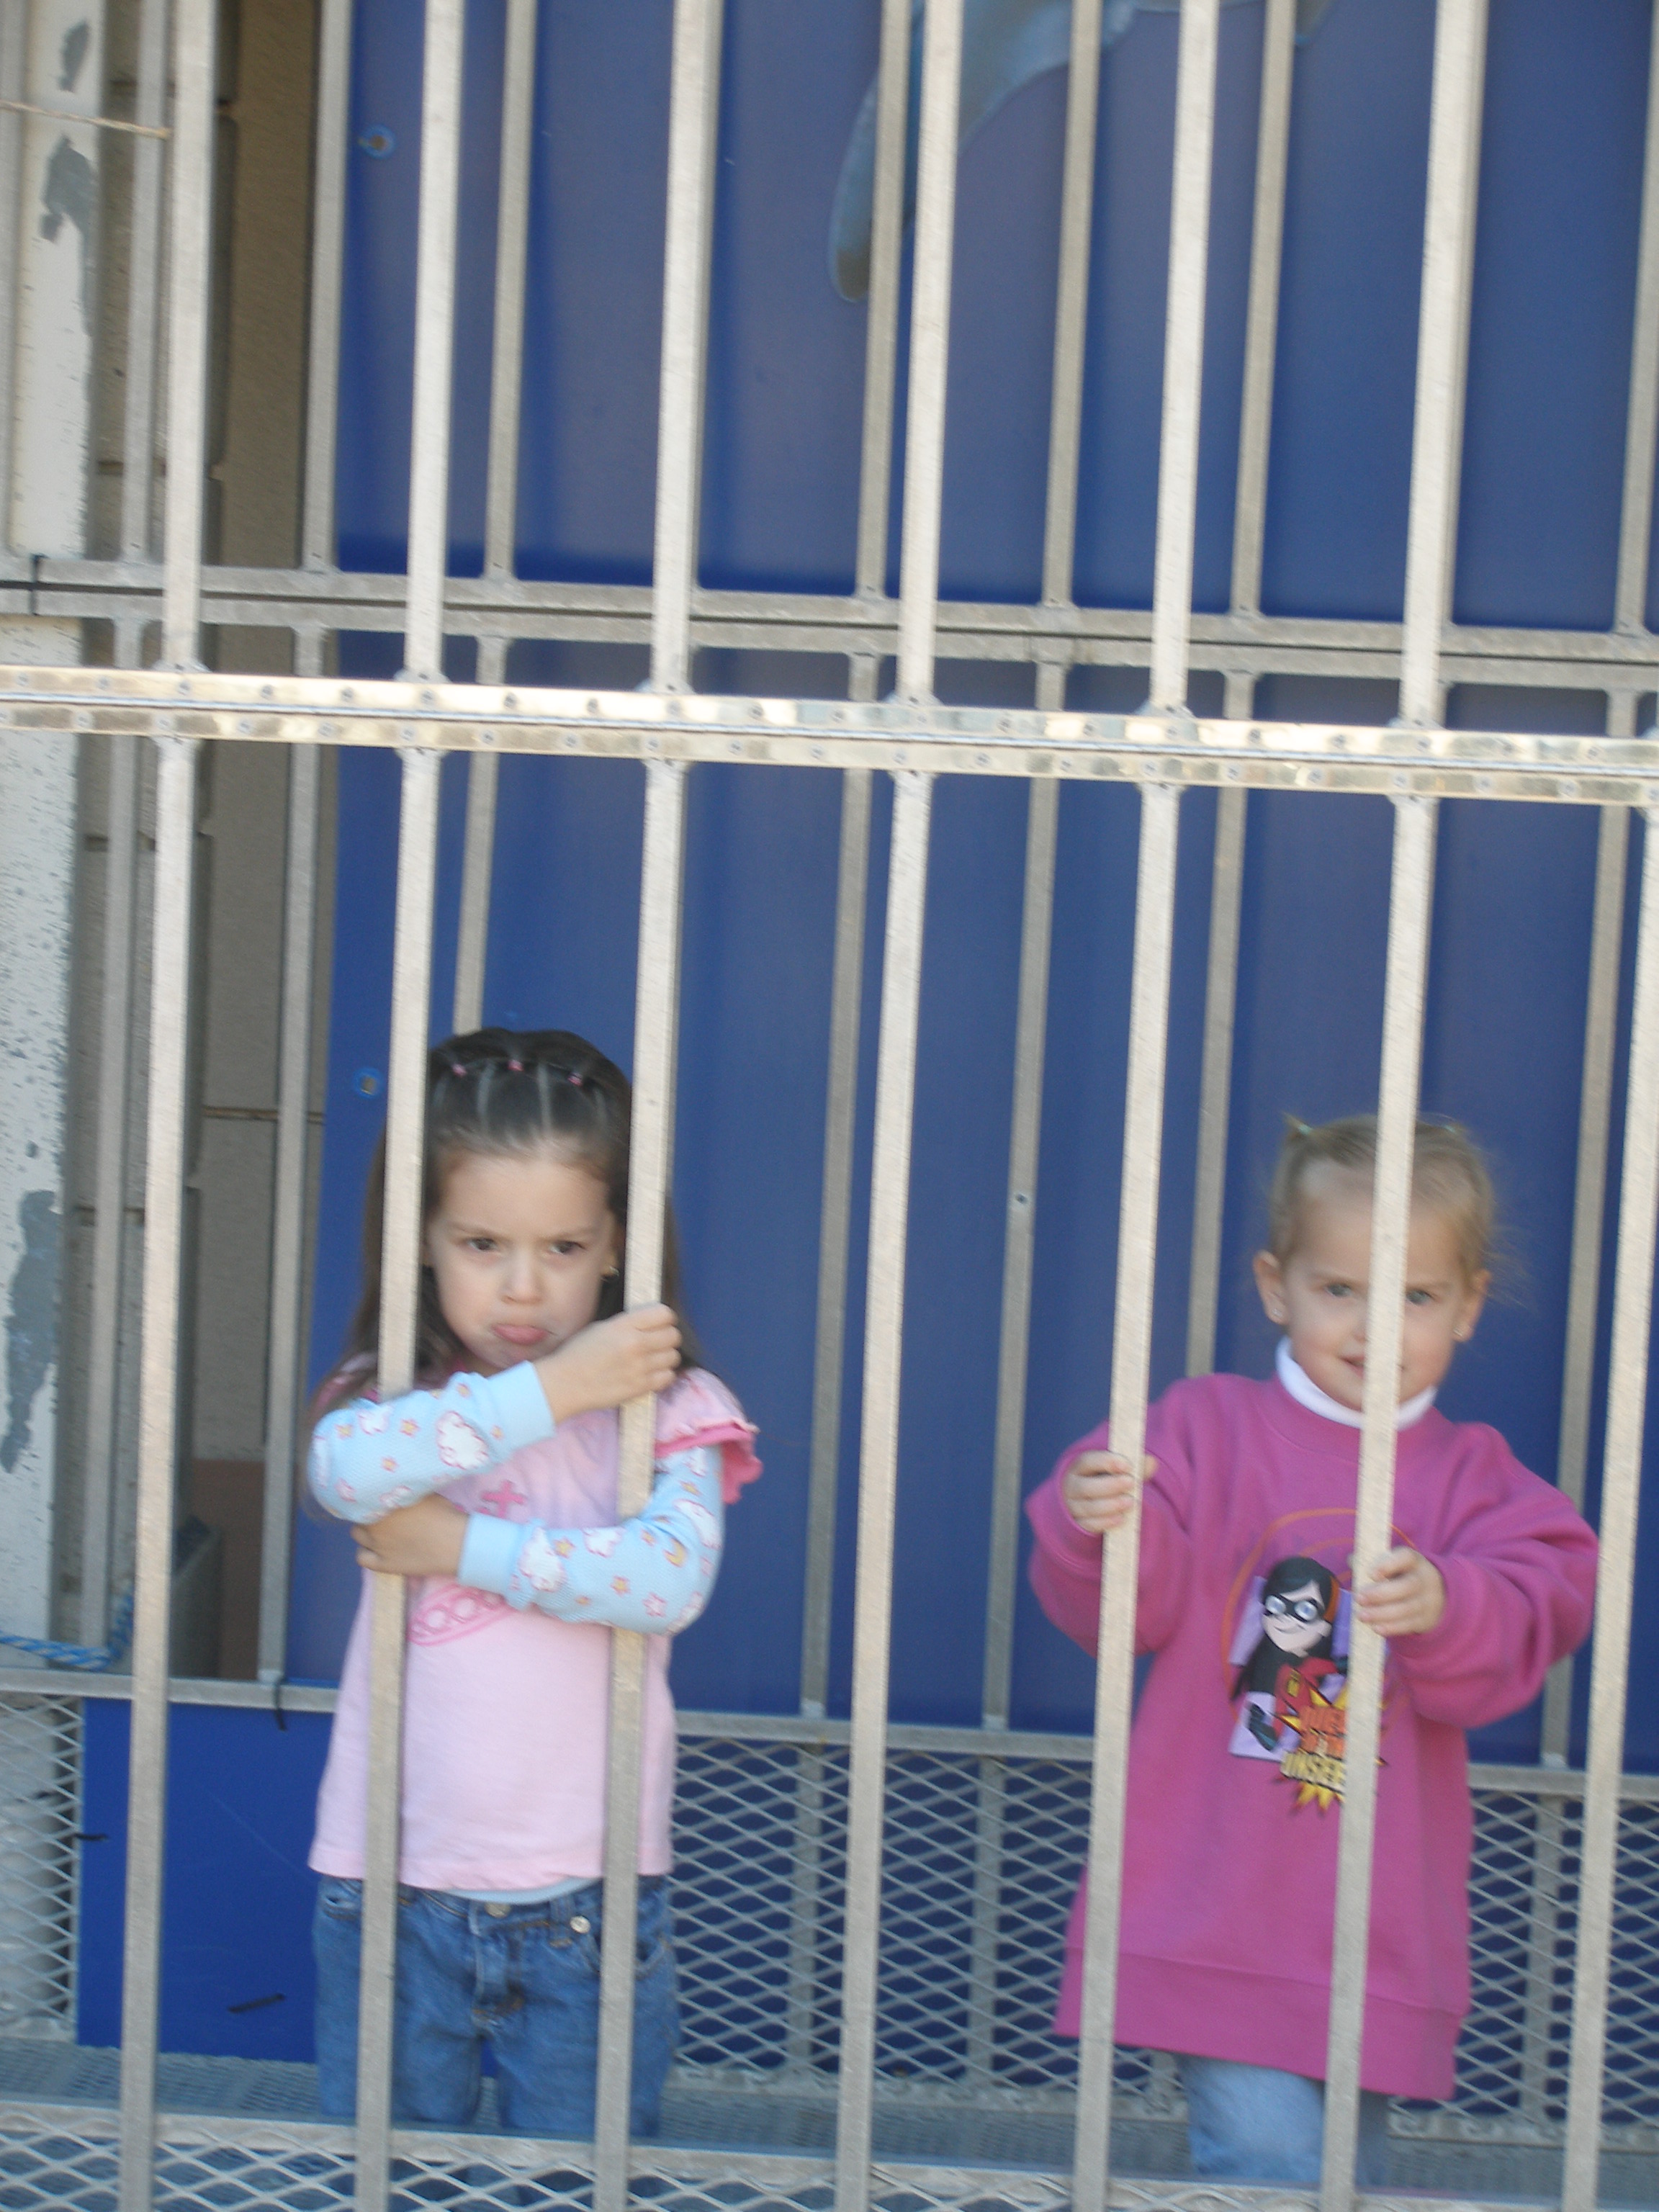 At Birch Aquarium,  Paige and Kaylin in the Shark Cage